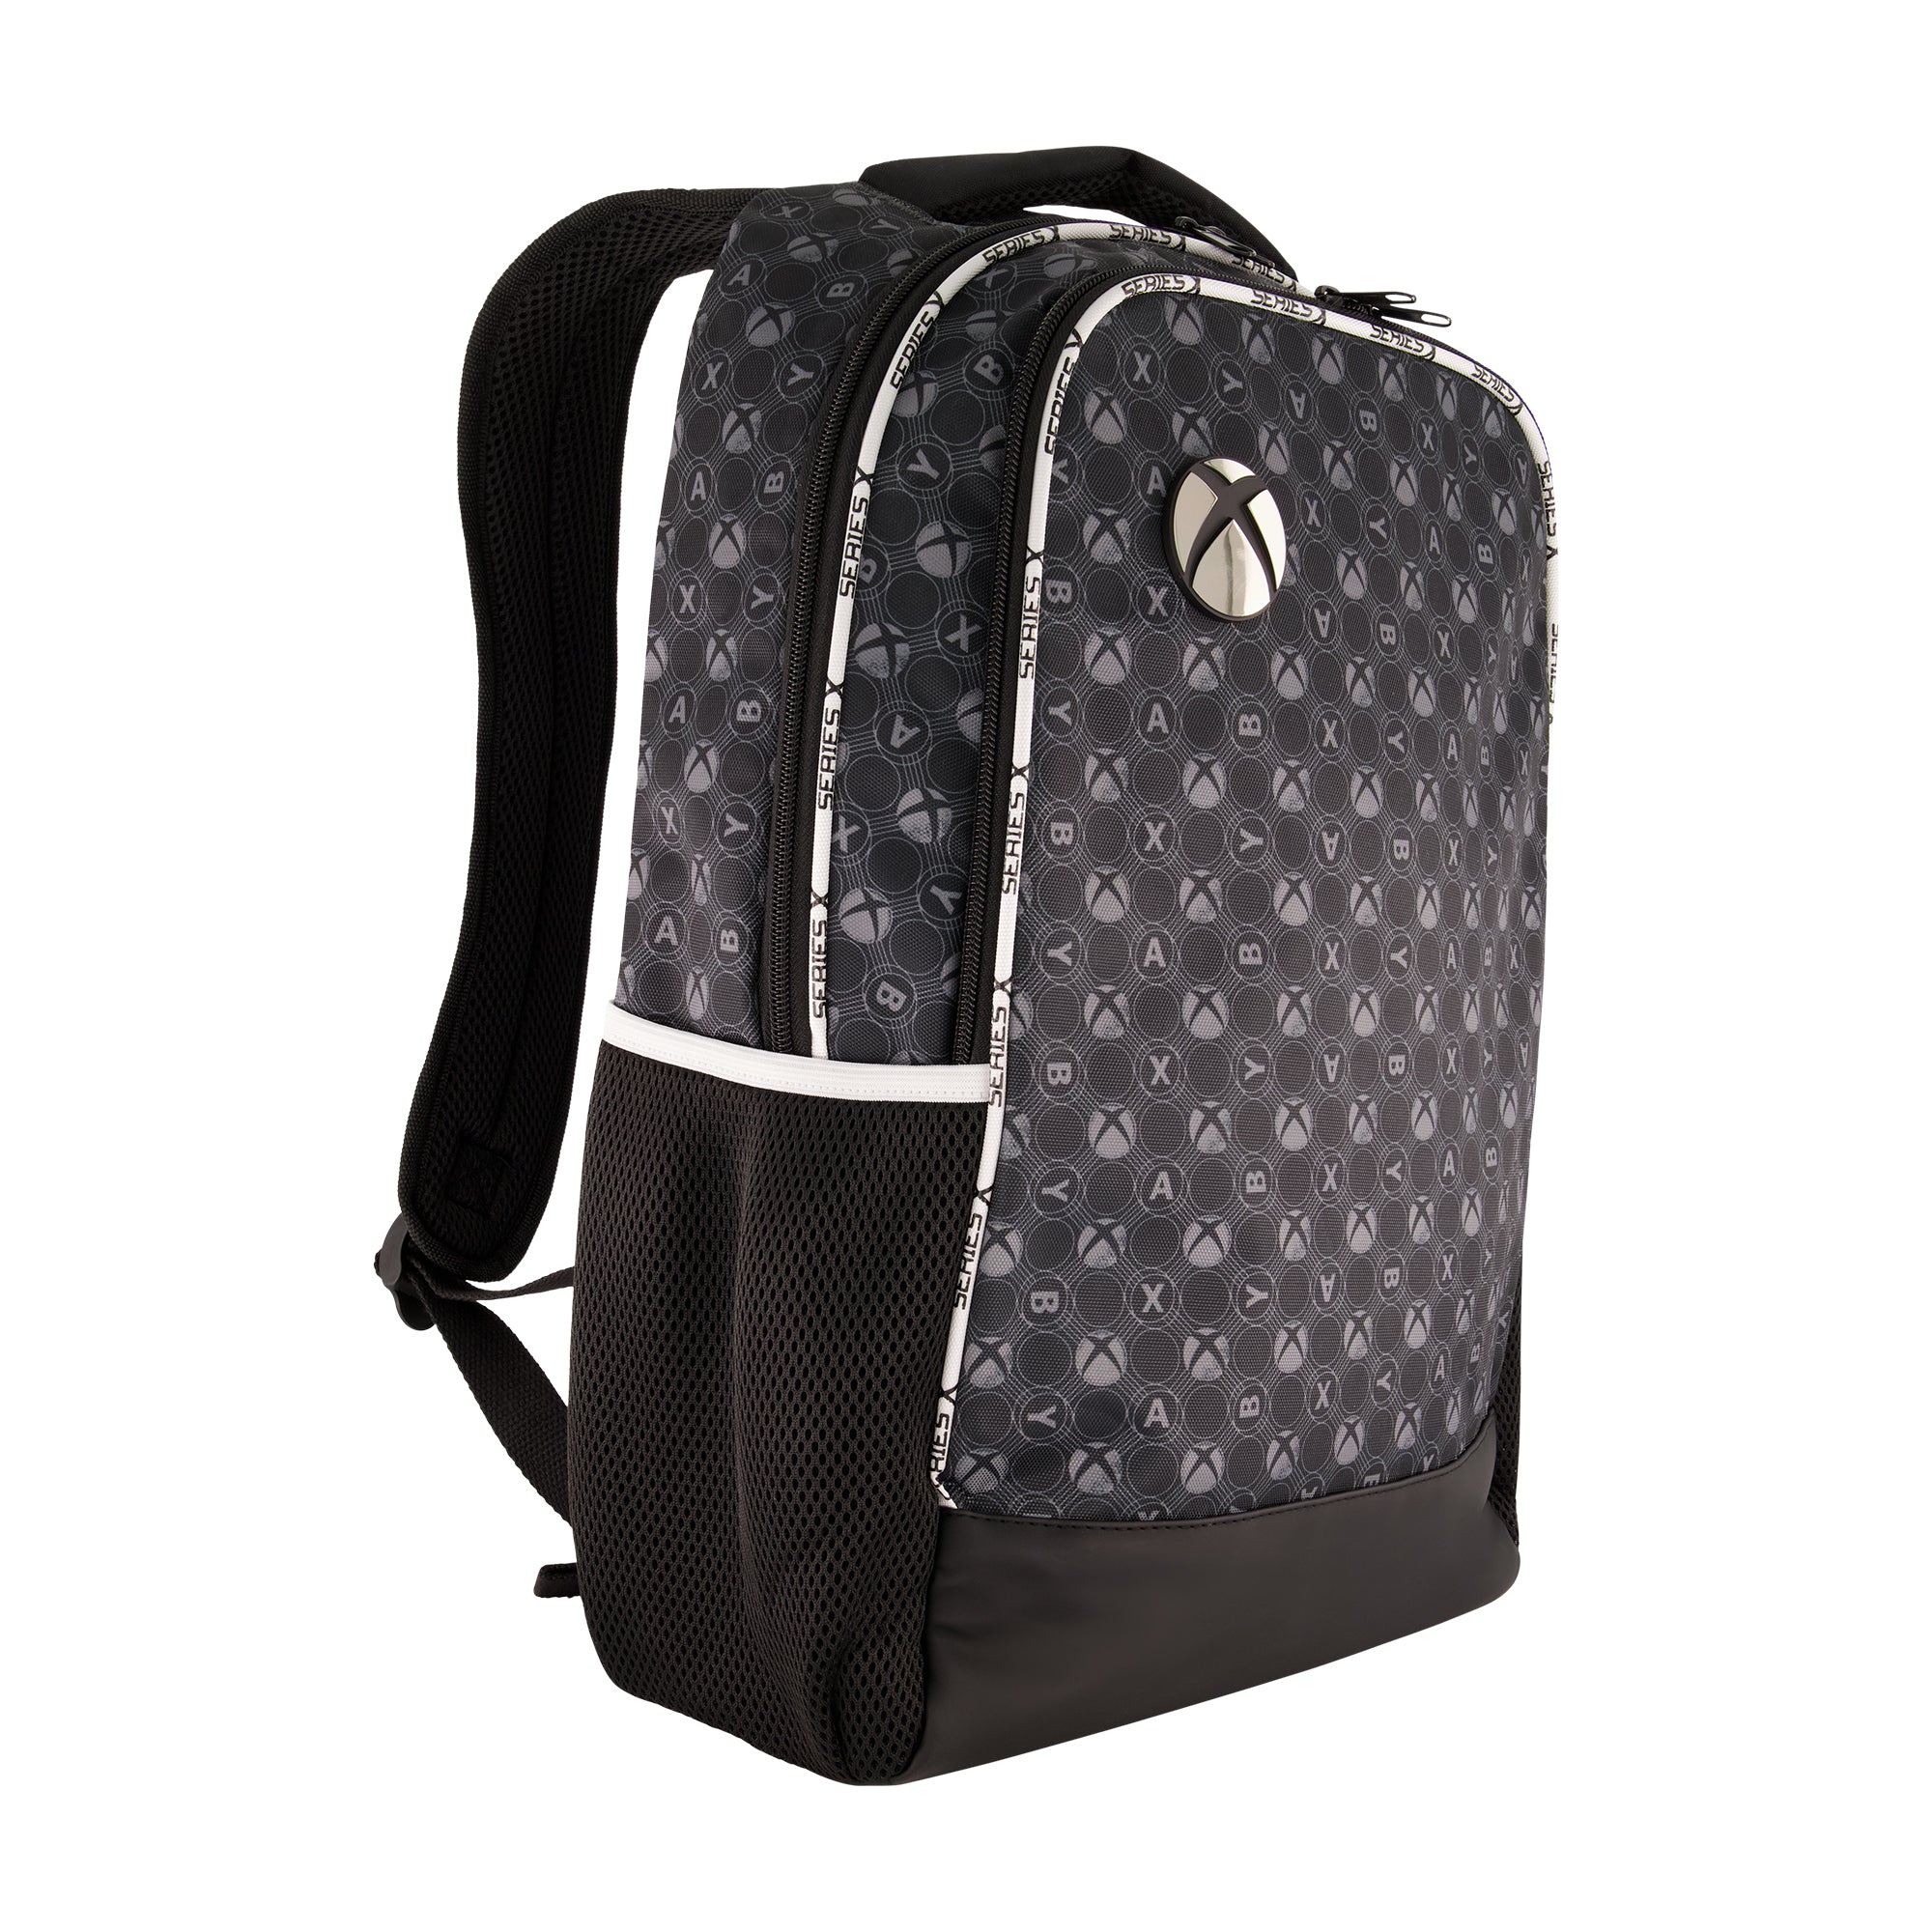 Designer Exchange Ltd - Looking for a spacious LV Backpack? The